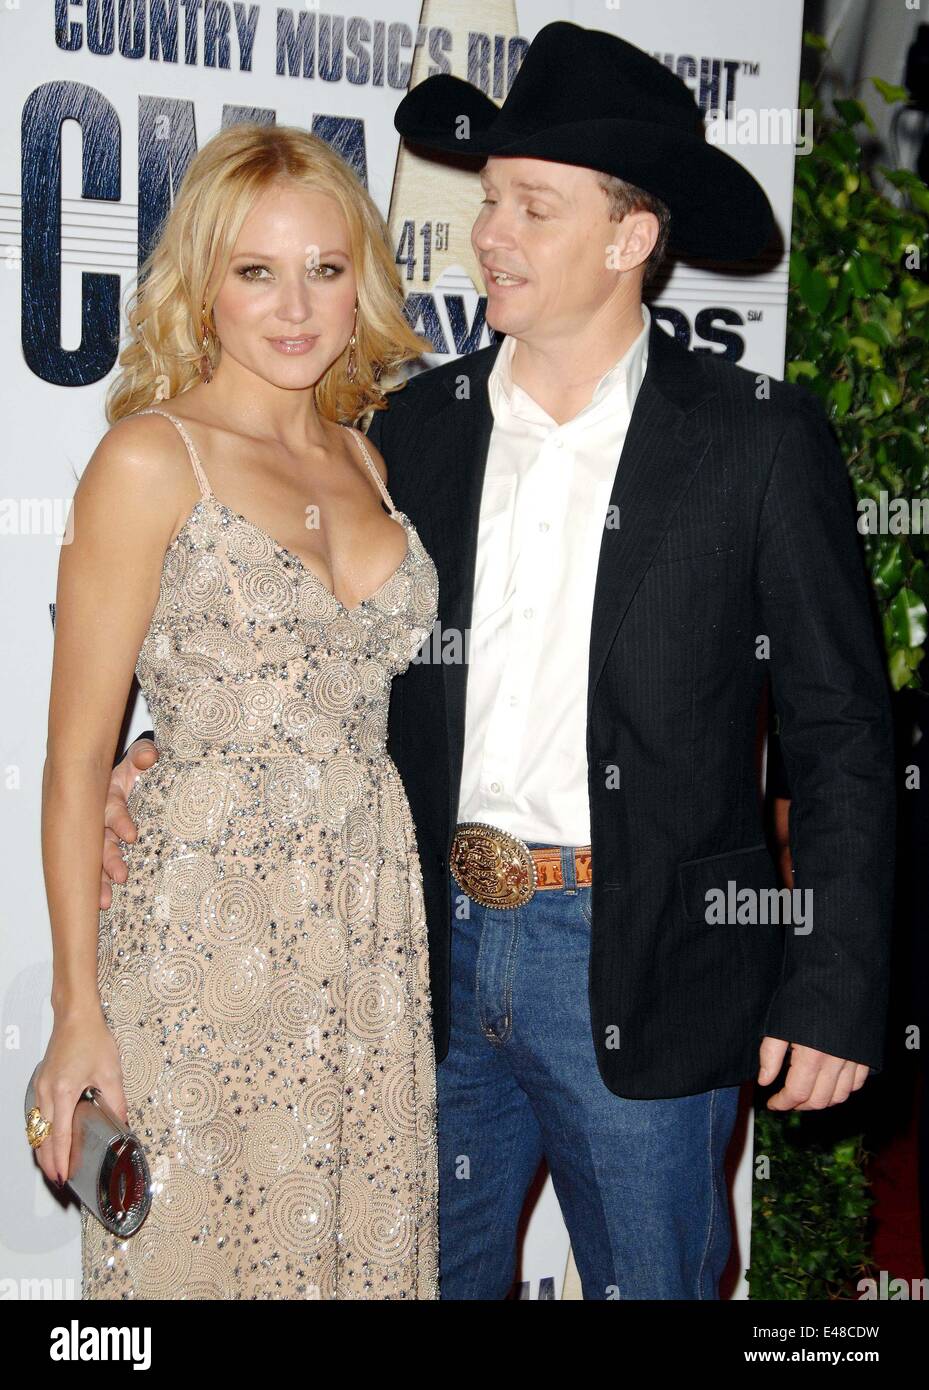 July 2, 2014 - Singer JEWEL and her rodeo cowboy husband TY MURRAY are divorcing after 16 years. The 40-year-old singer, who married the rodeo pro back in August 2008 after 10 years together, announced the split on her official website. PICTURED - Nov. 7, 2007 - Nashville, Tennessee, U.S. - Jewel and Ty Murray attends the 41st Annual CMA Awards Arrivals at the Sommet Center in Nashville. (Credit Image: © James Diddick/Globe Photos/ZUMAPRESS.com) Stock Photo